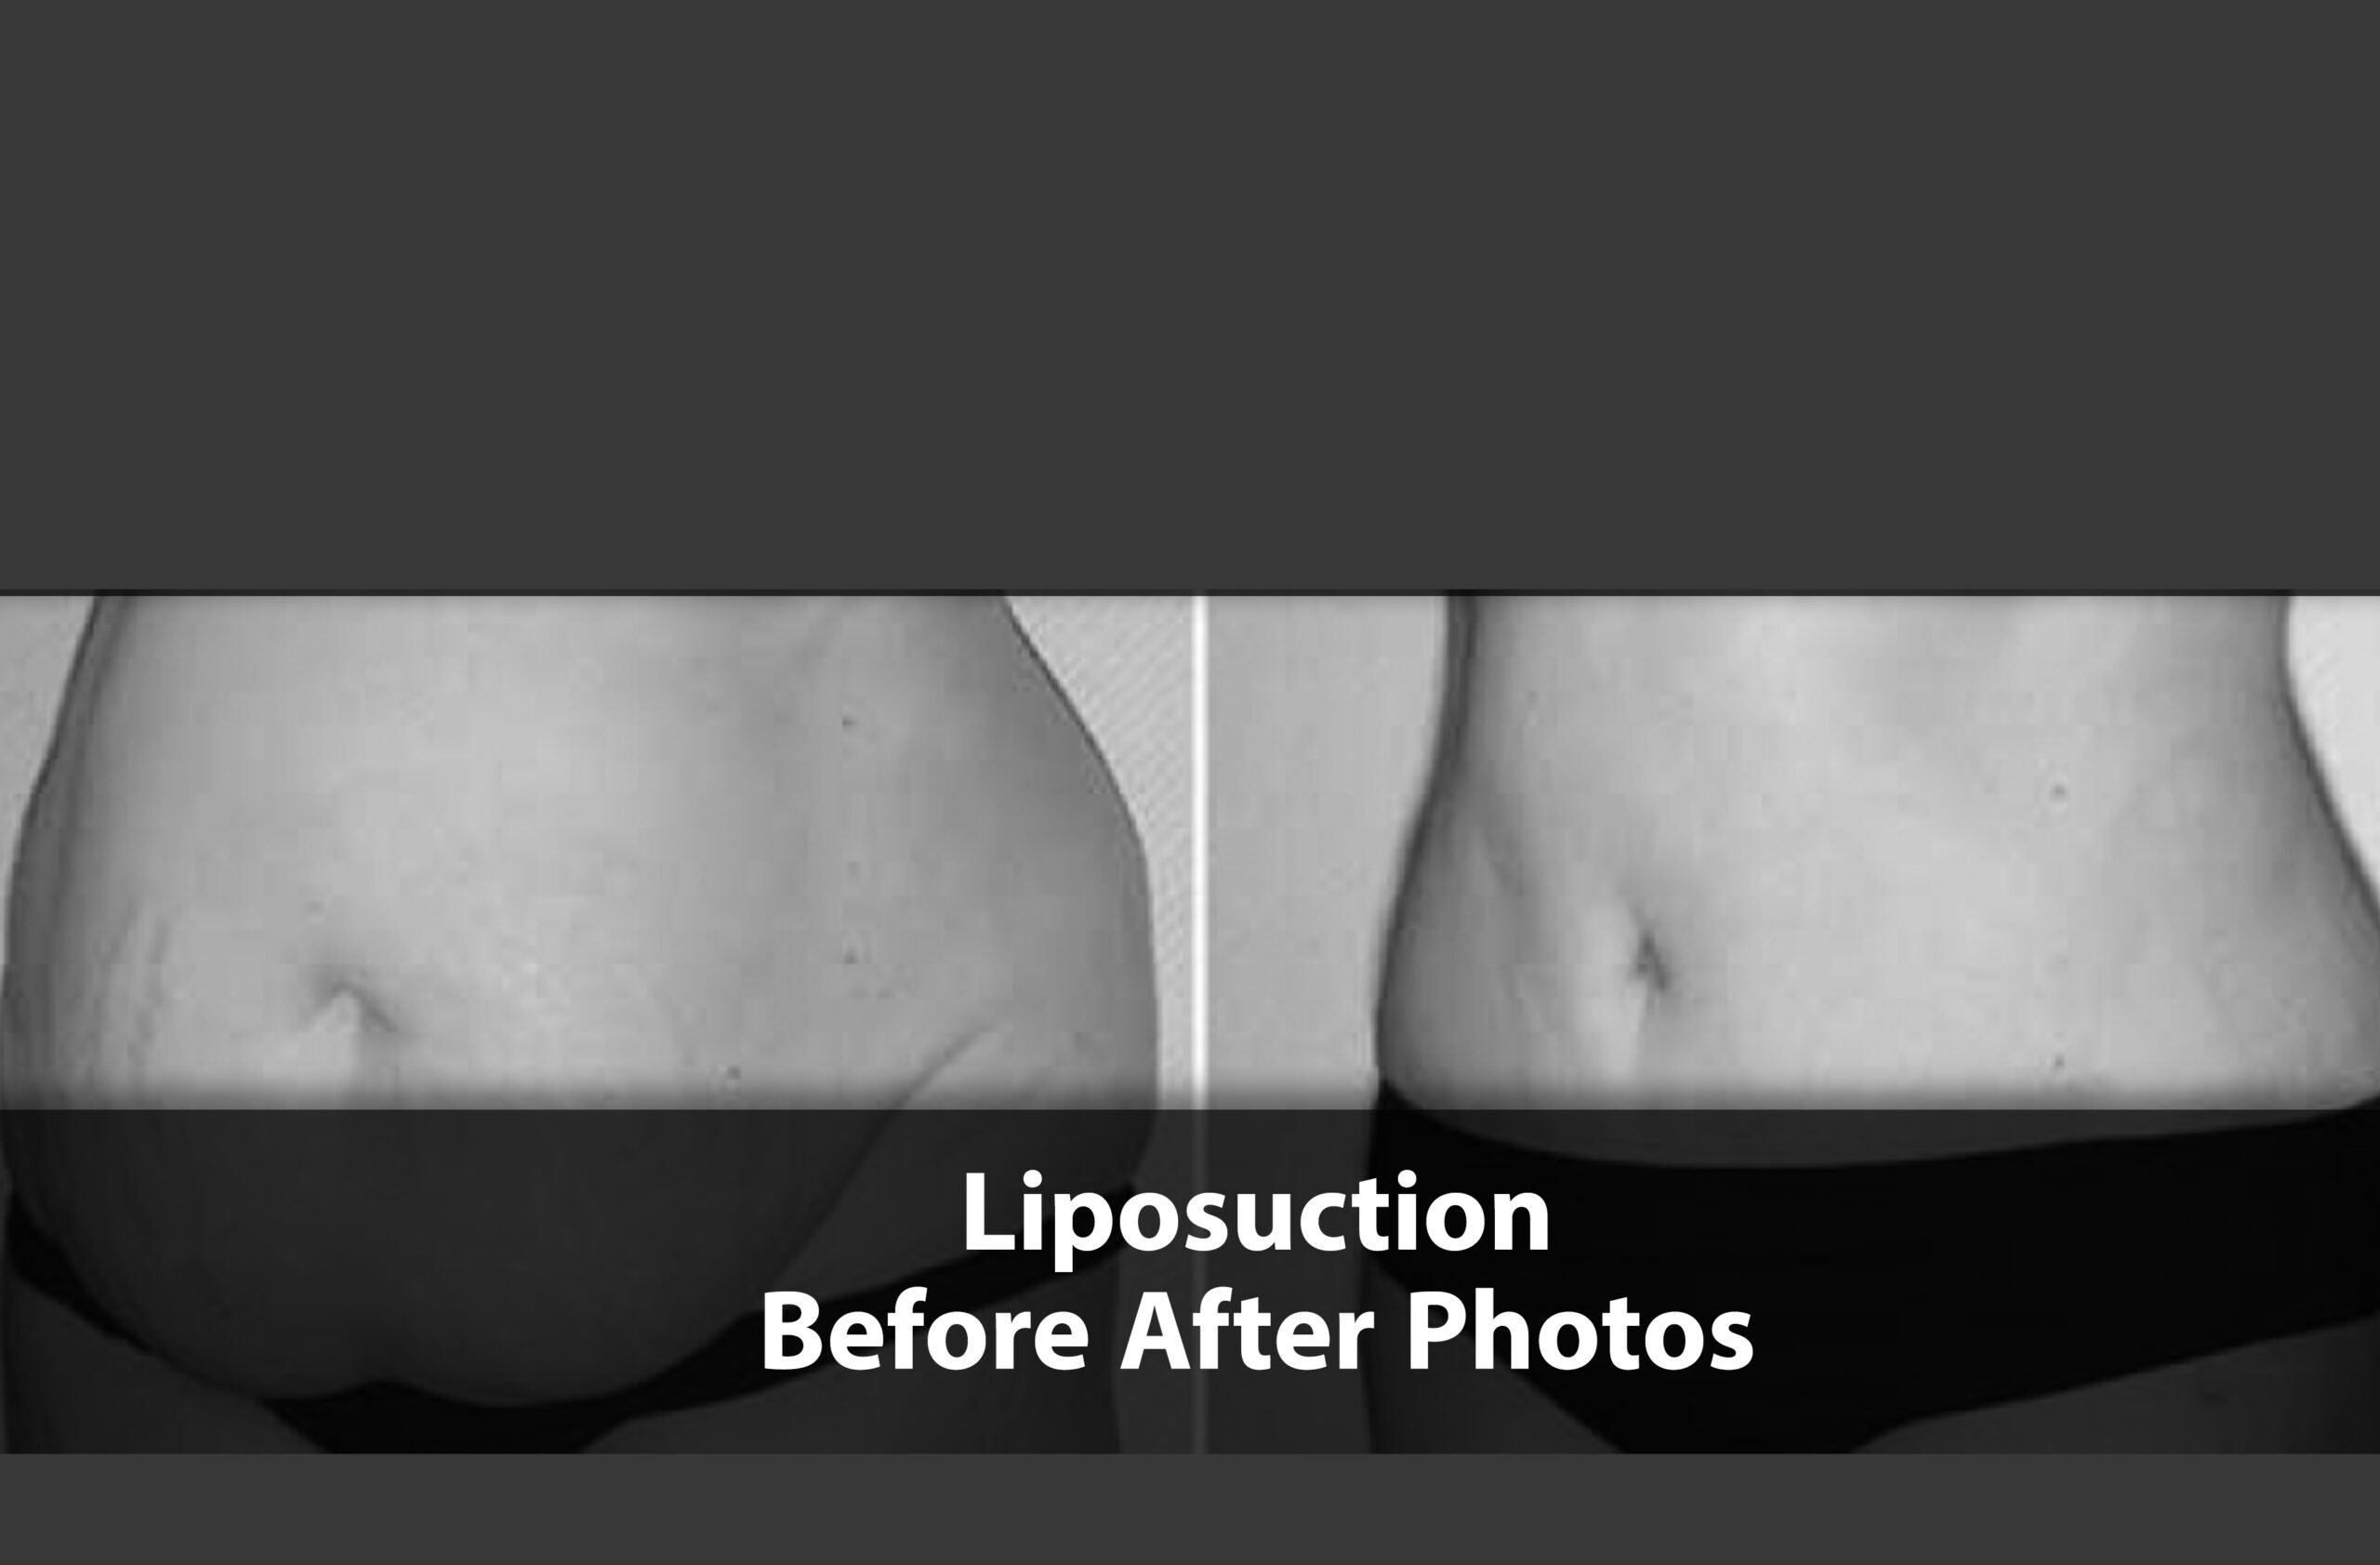 Liposuction before after